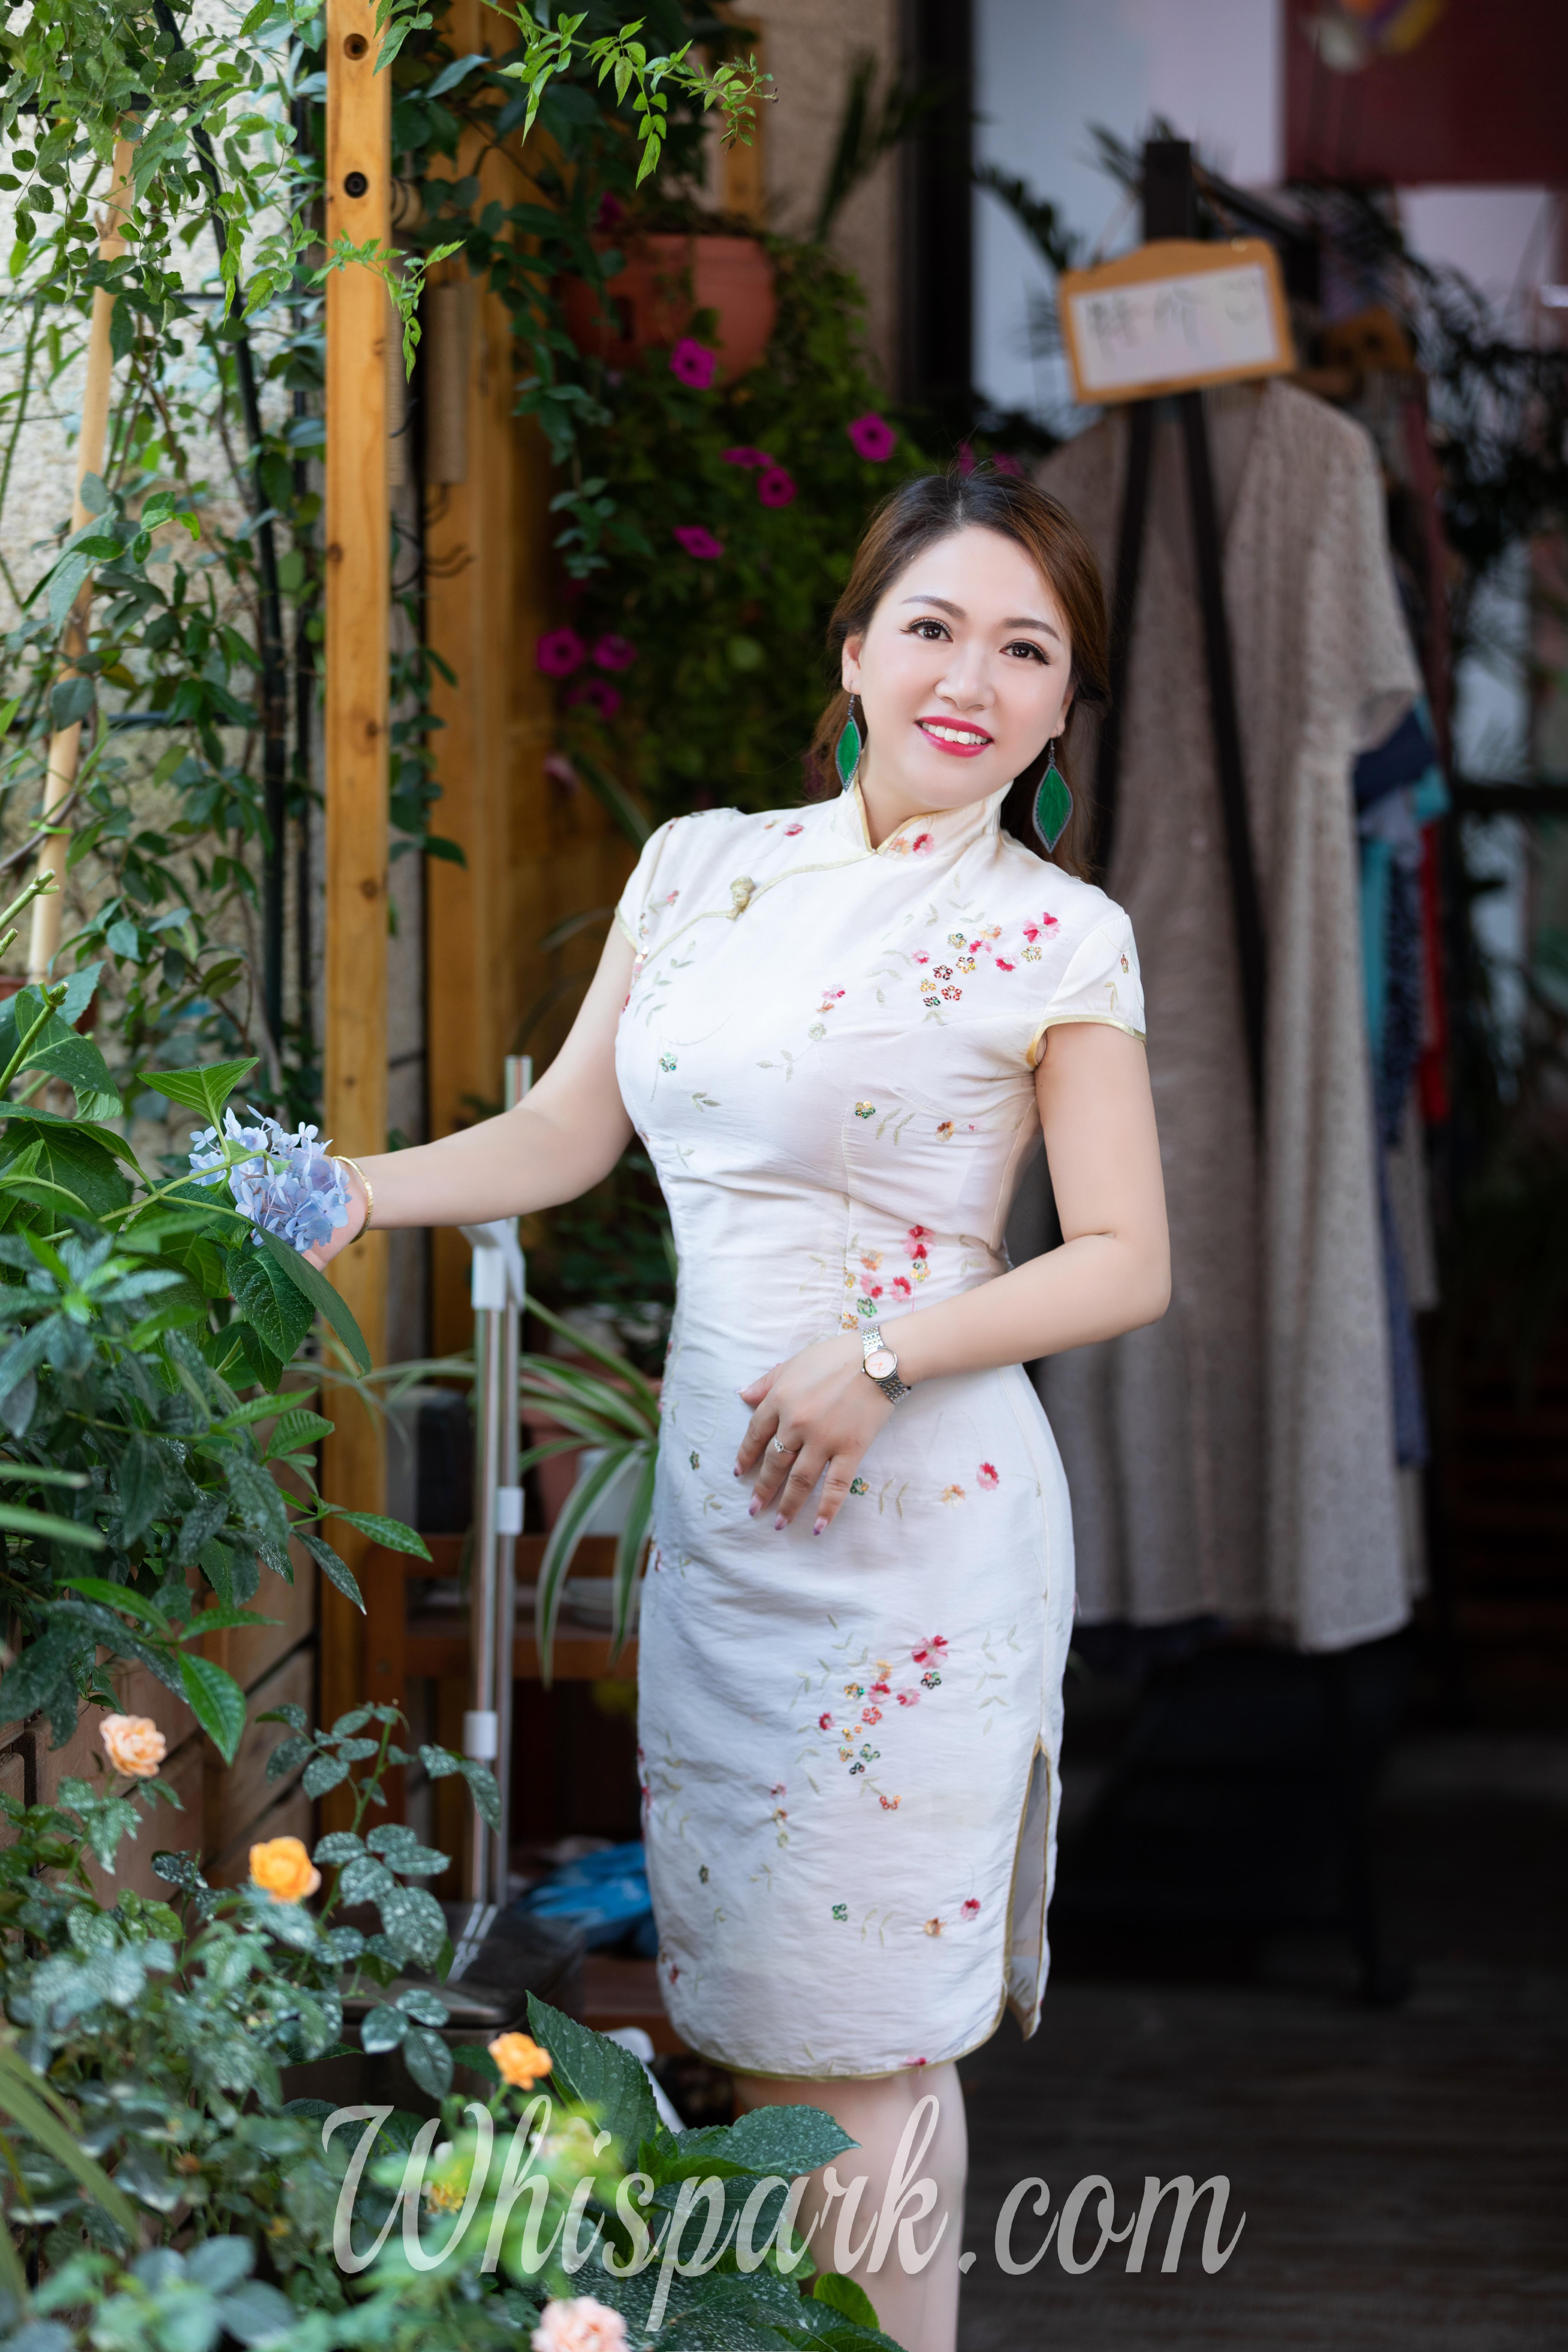 Who Can Resist Asian Hot Ladies When They Wear The Feminine Cheongsam